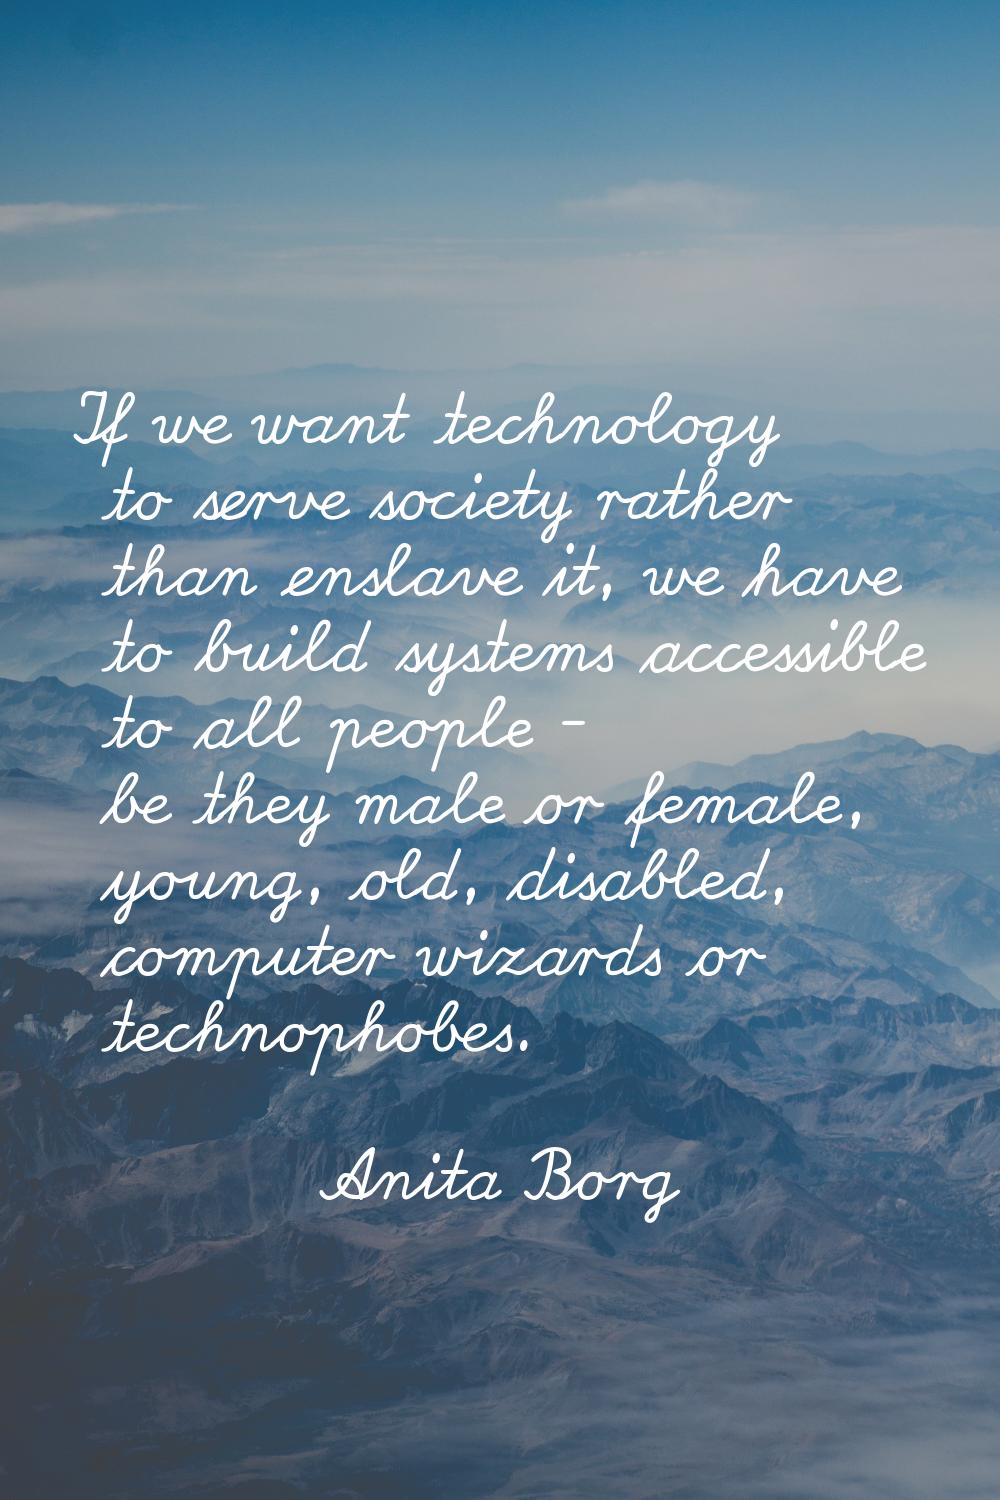 If we want technology to serve society rather than enslave it, we have to build systems accessible 